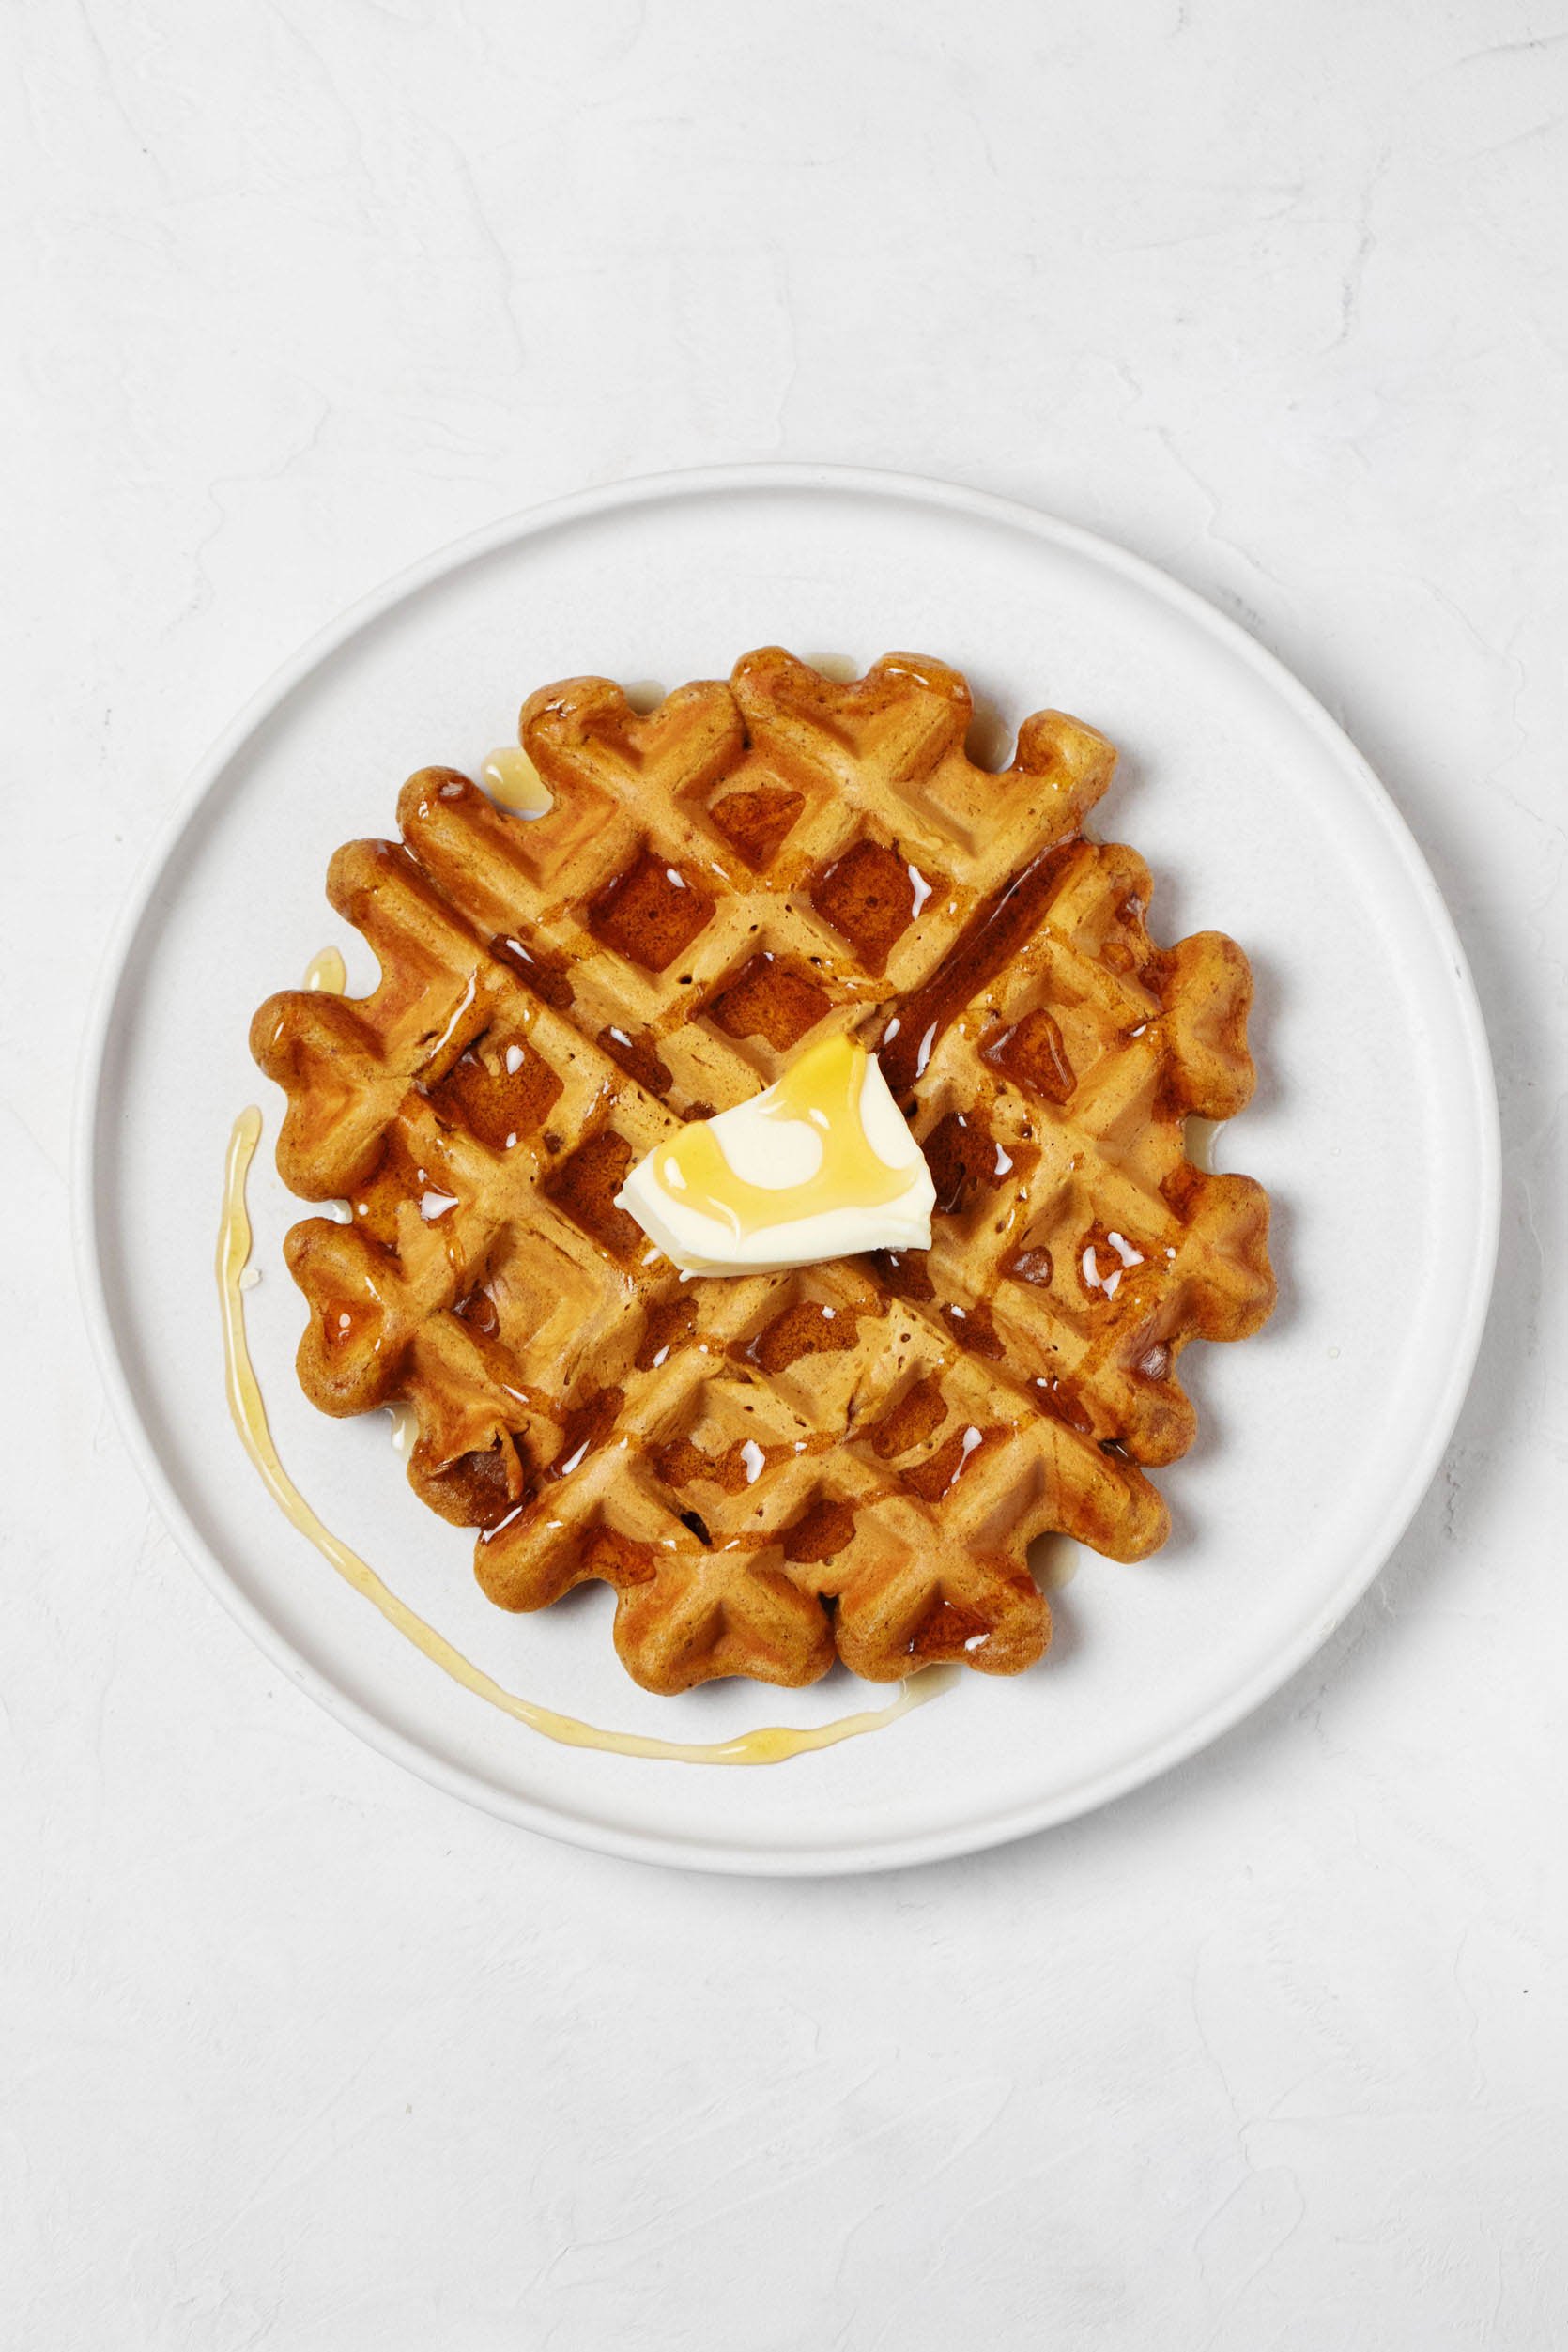 Spiced Gingerbread Waffles - A Beautiful Mess